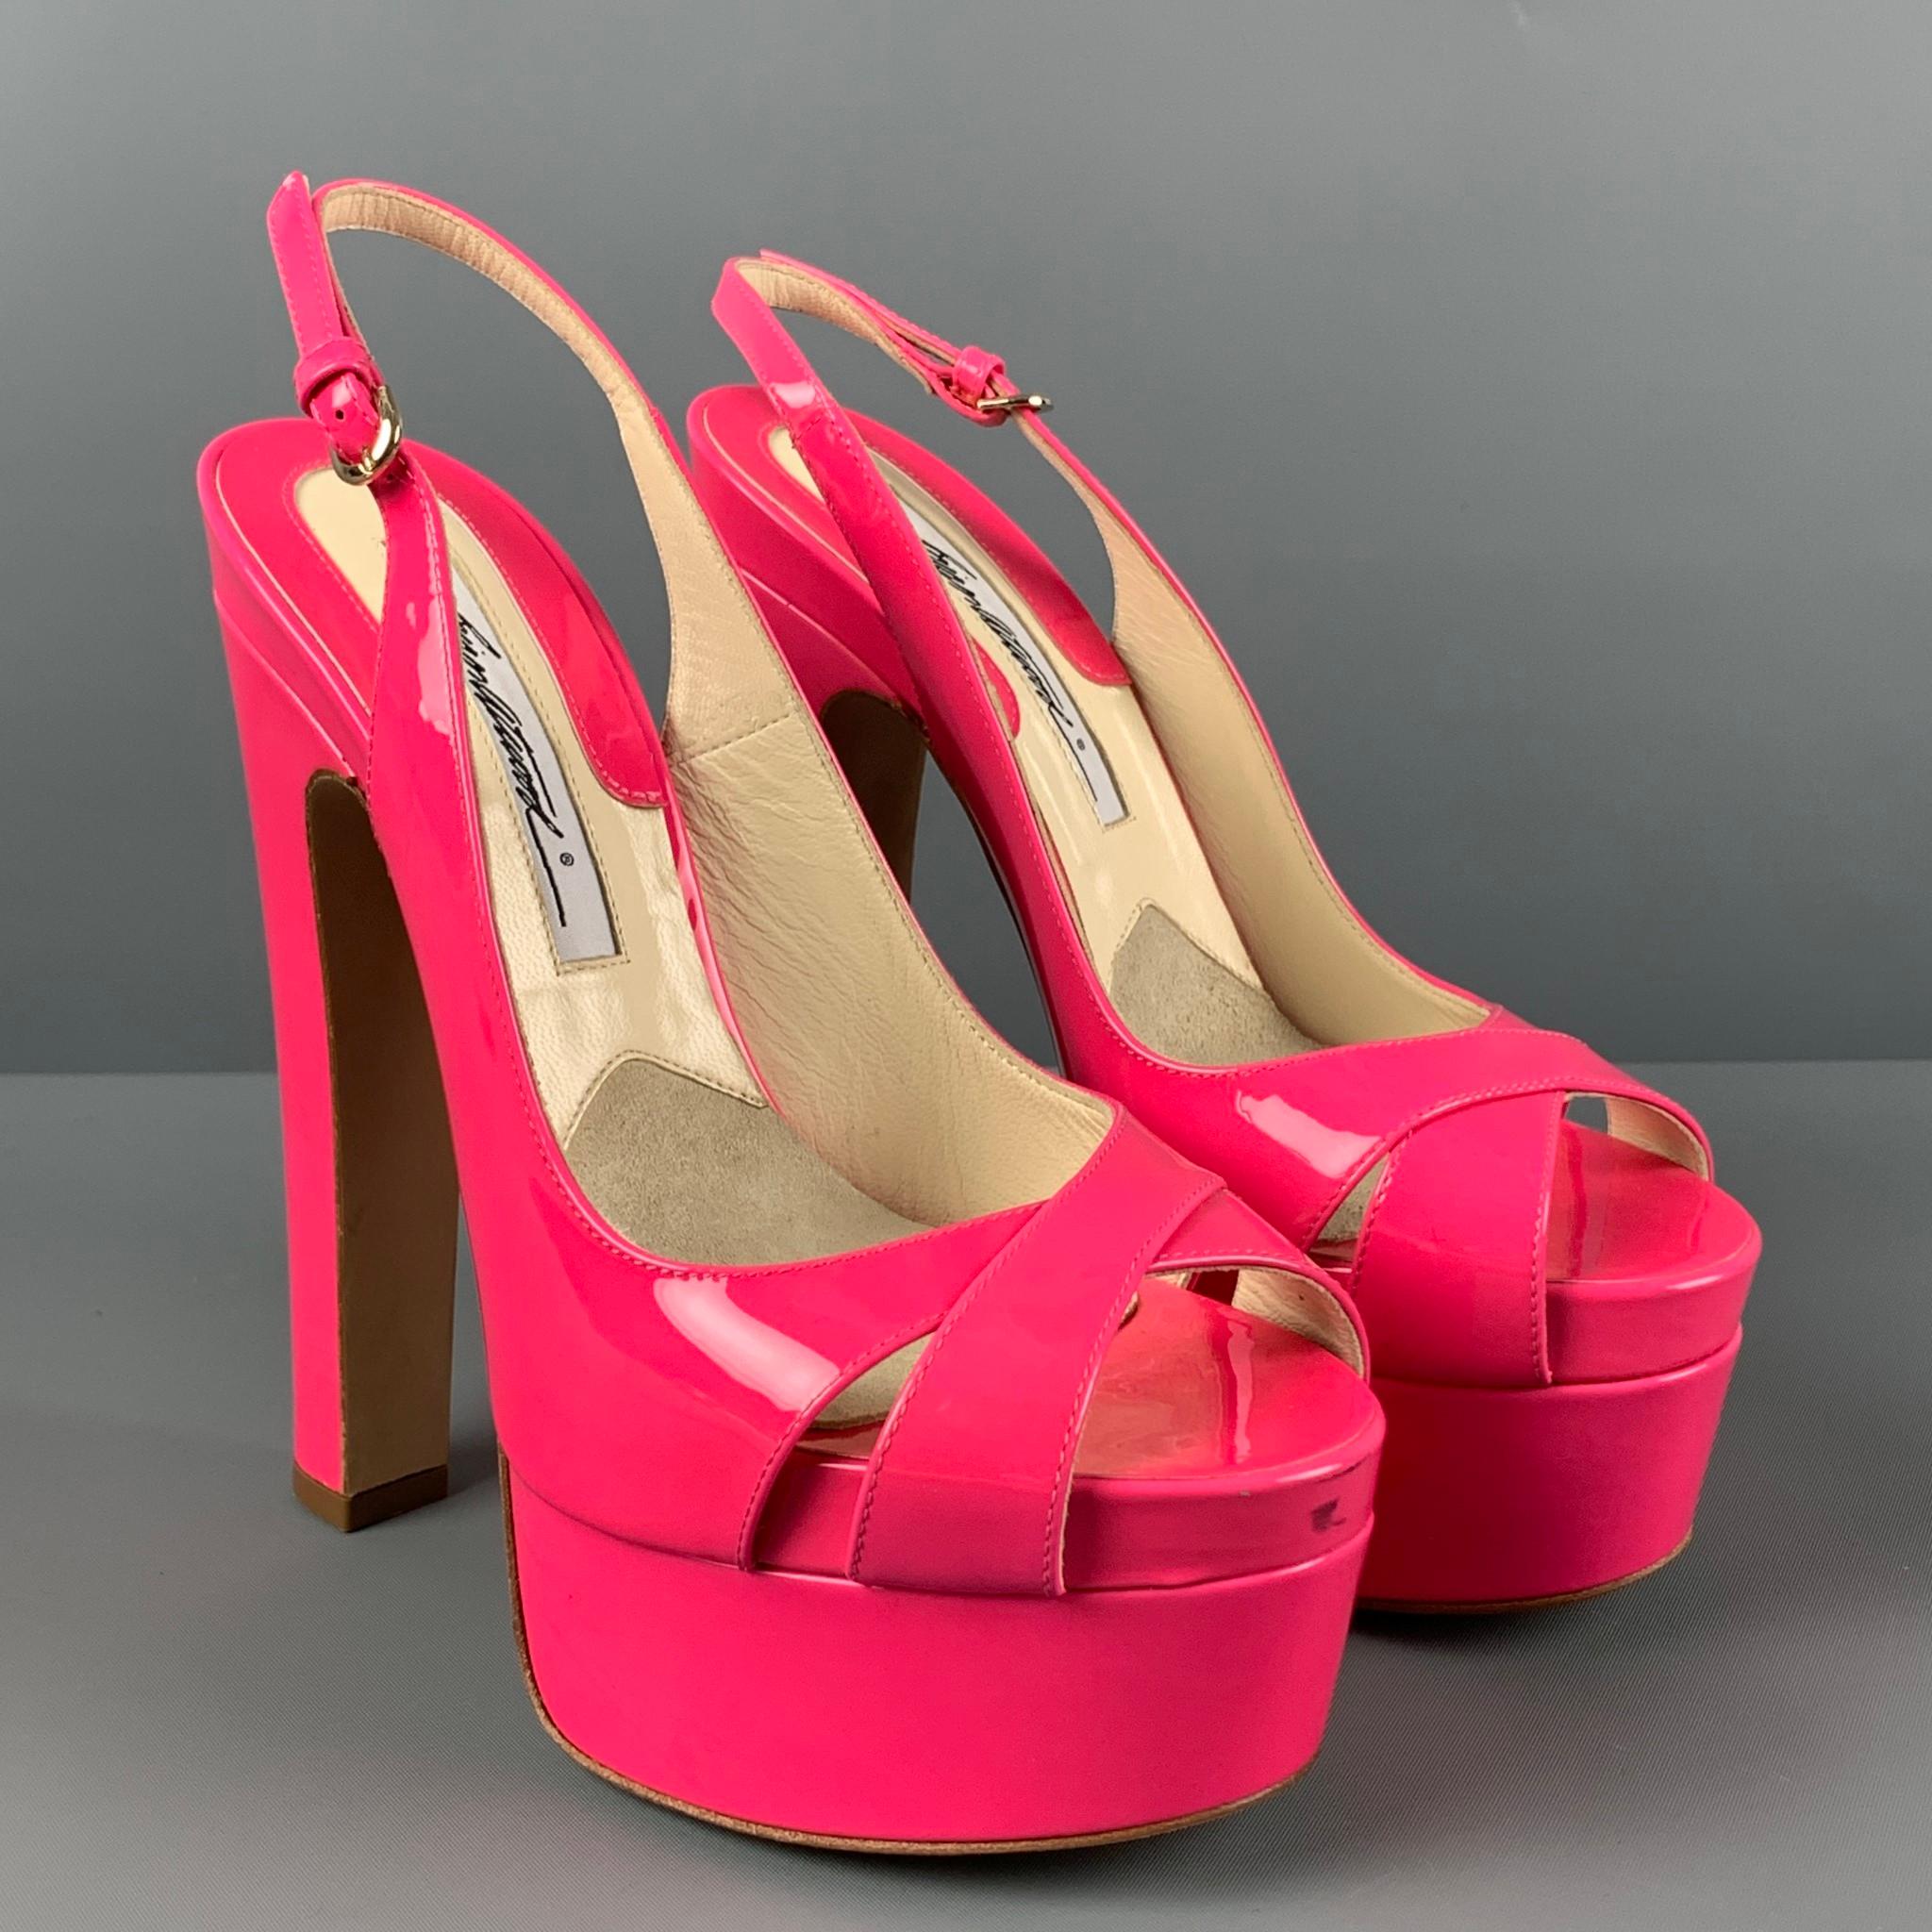 BRIAN ATWOOD sandals comes in a pink patent leather featuring a open toe, platform, ankle strap, and a chunky heel. Made in Italy. 

Good Pre-Owned Condition. Light wear. As-Is.
Marked: 37.5
Original Retail Price: $650.00

Measurements:

Heel: 5.75